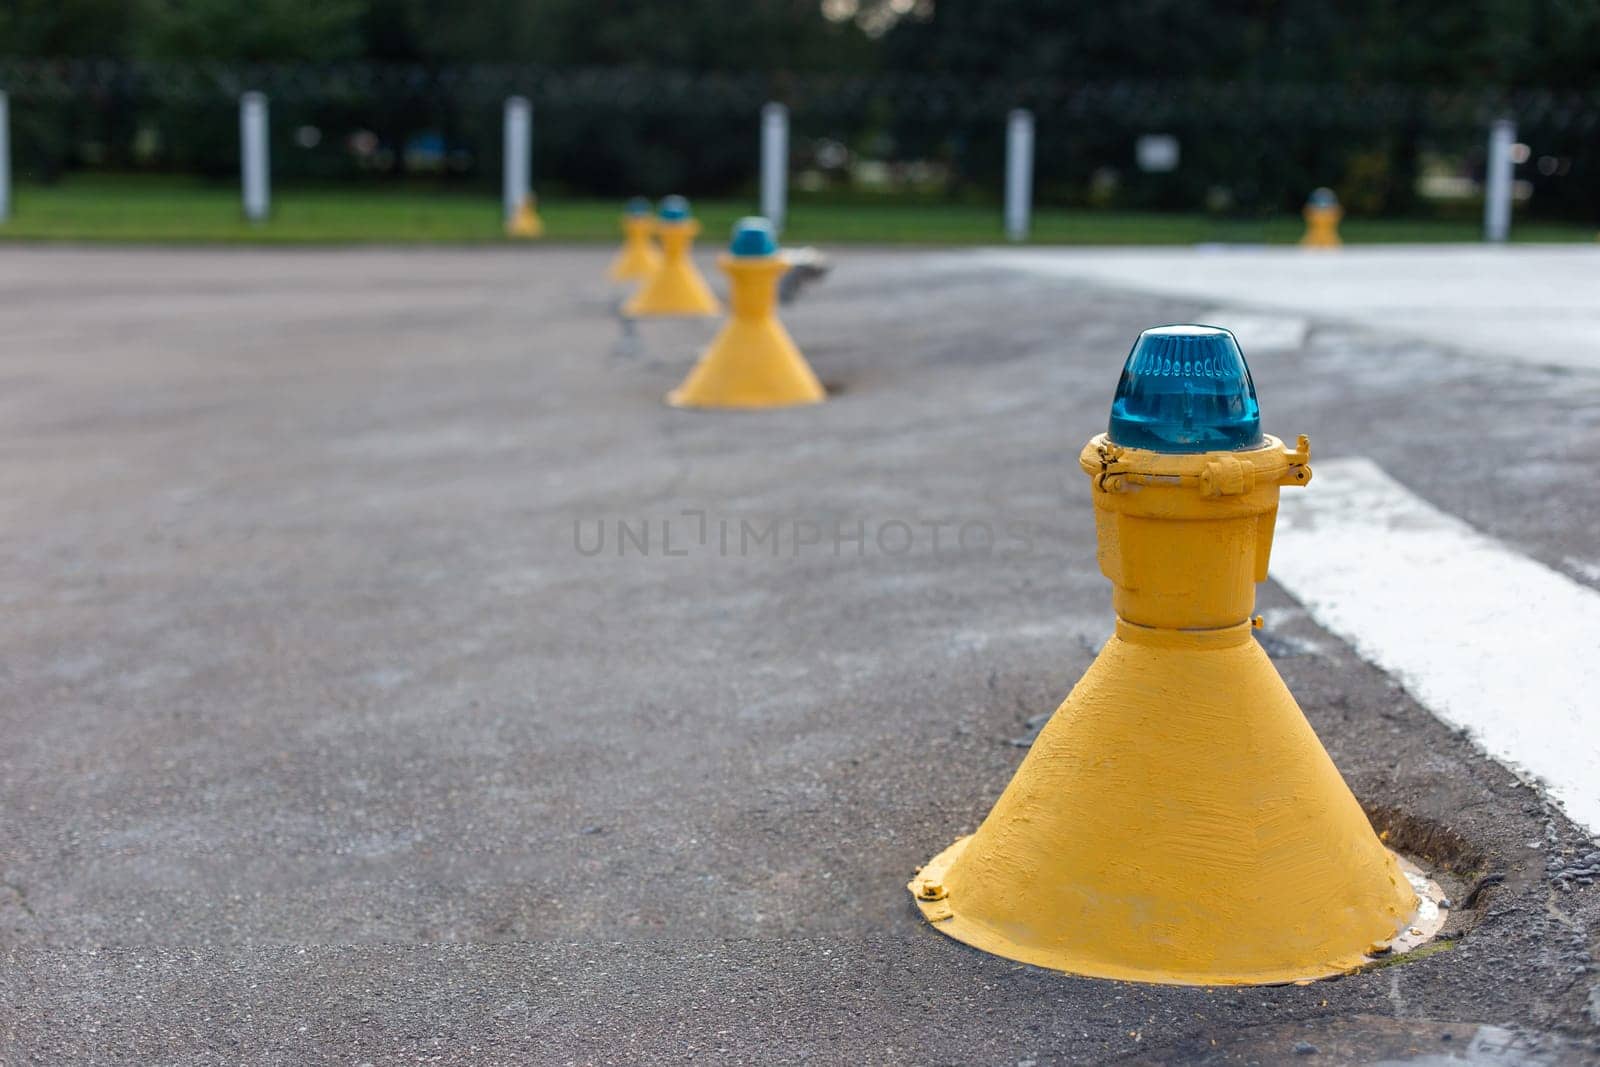 Row of yellow airfield ground lights with blue tops, used for runway and taxiway guidance at an airport by Zakharova